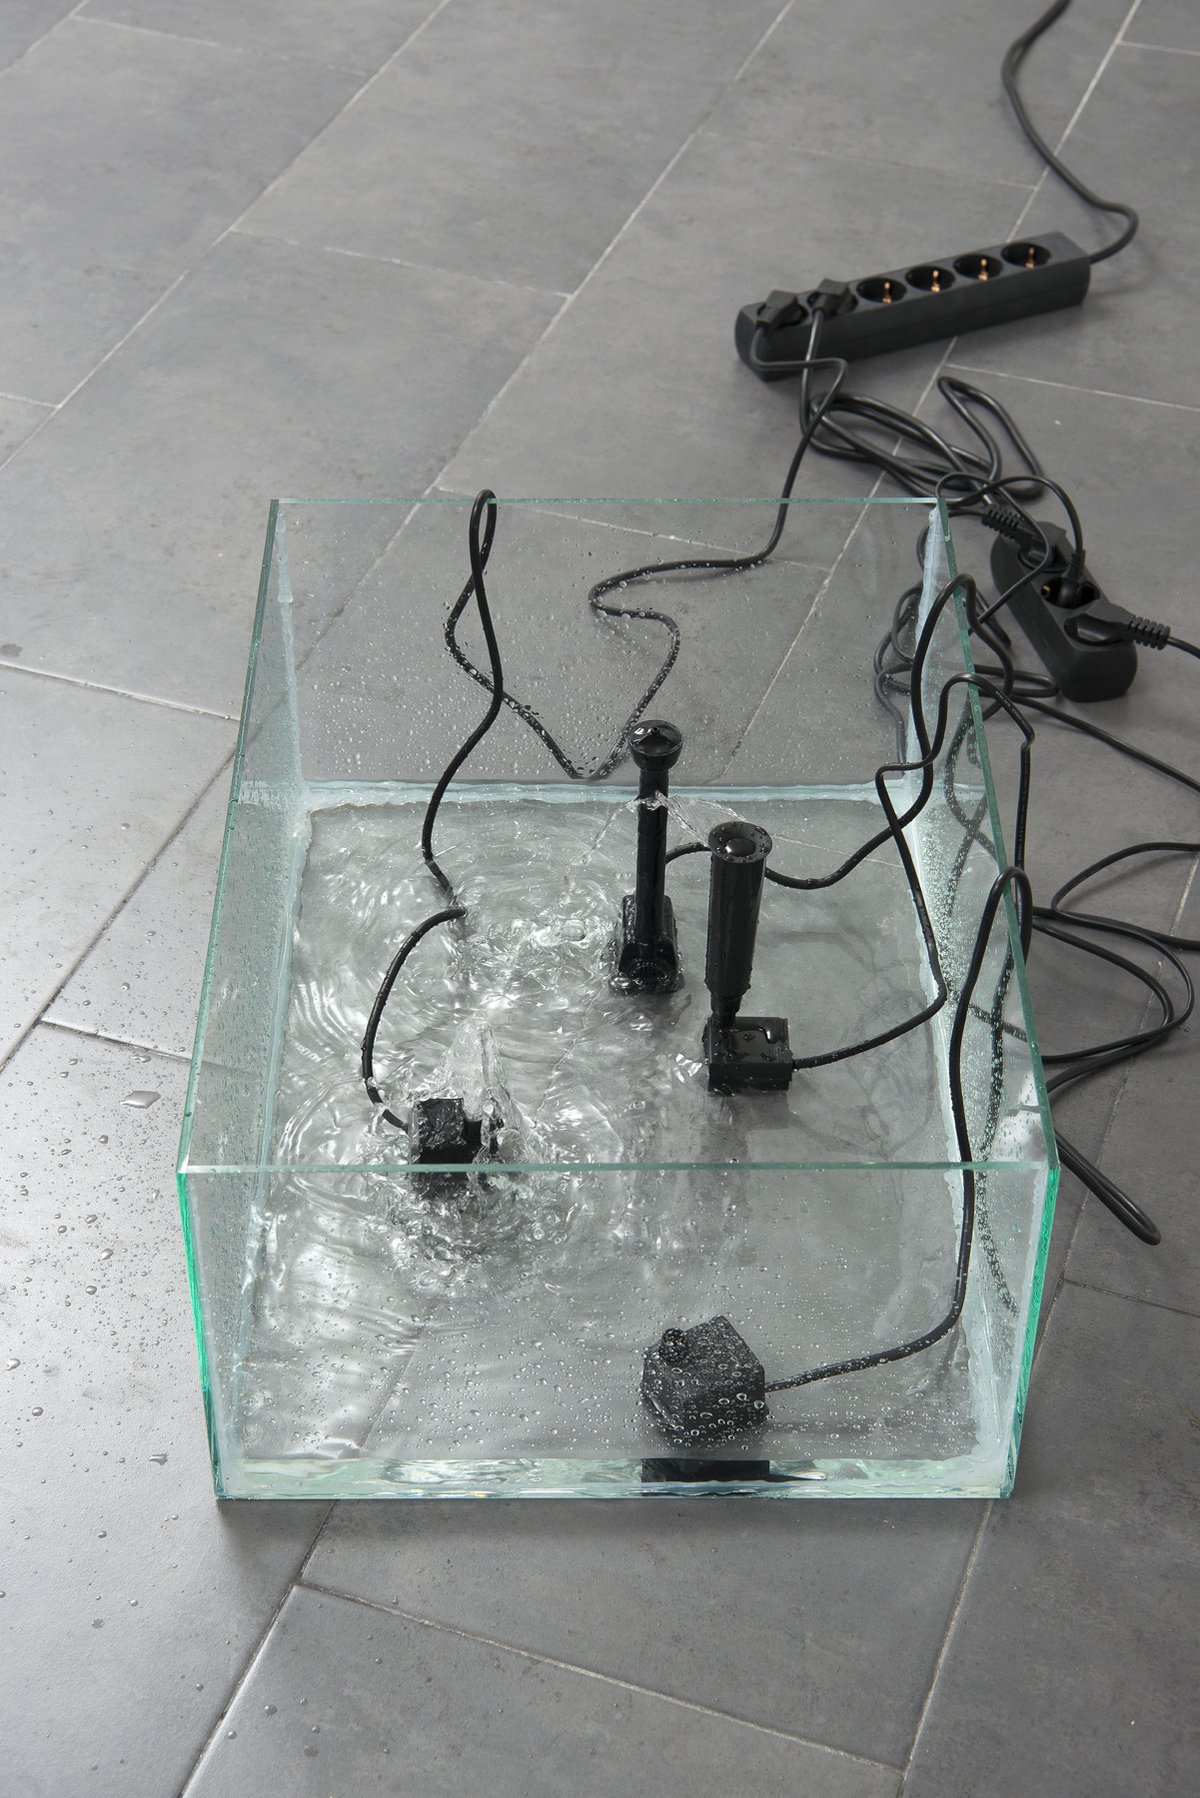 Jutta ZimmermannUntitled, 2013Glass, fountains, water, multi-contact plug, extension cable45 x 30 x 28 cm